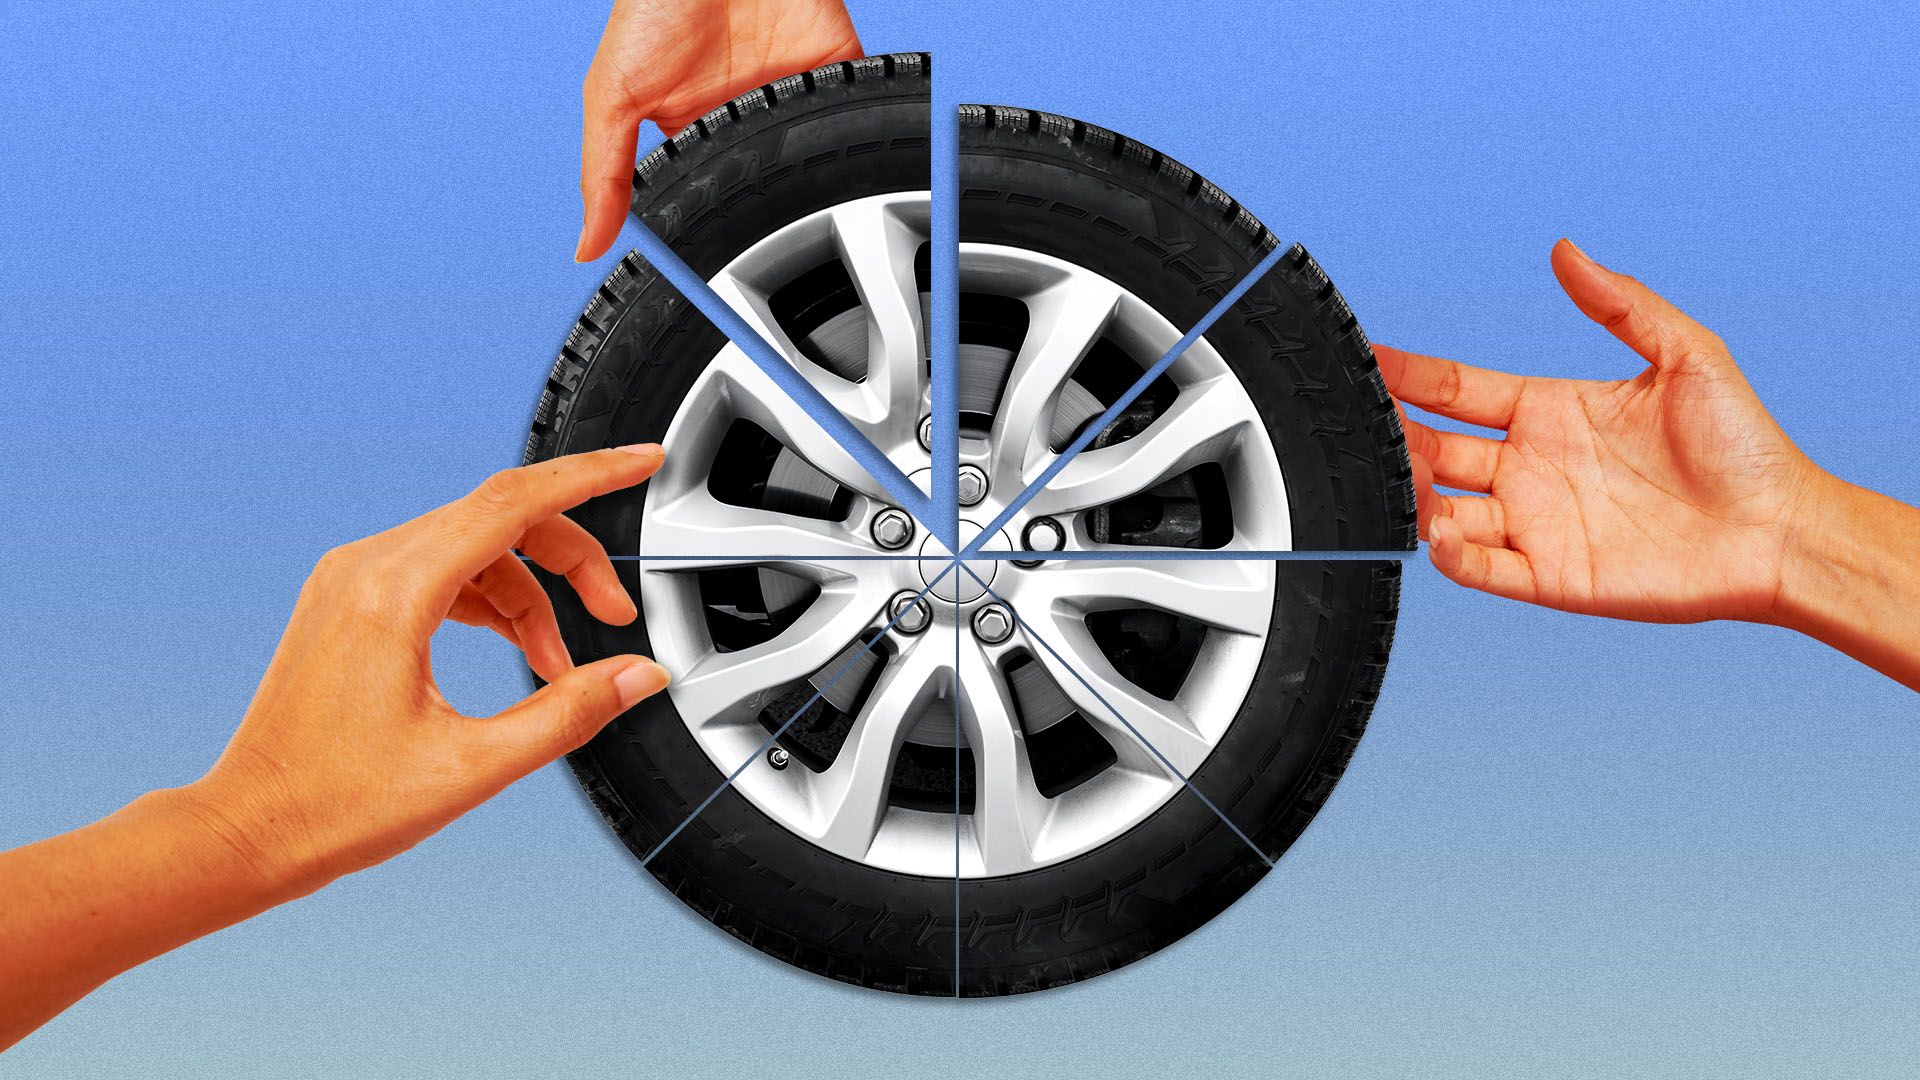 Illustration of tire split like a pie, with hands reaching to grab slices